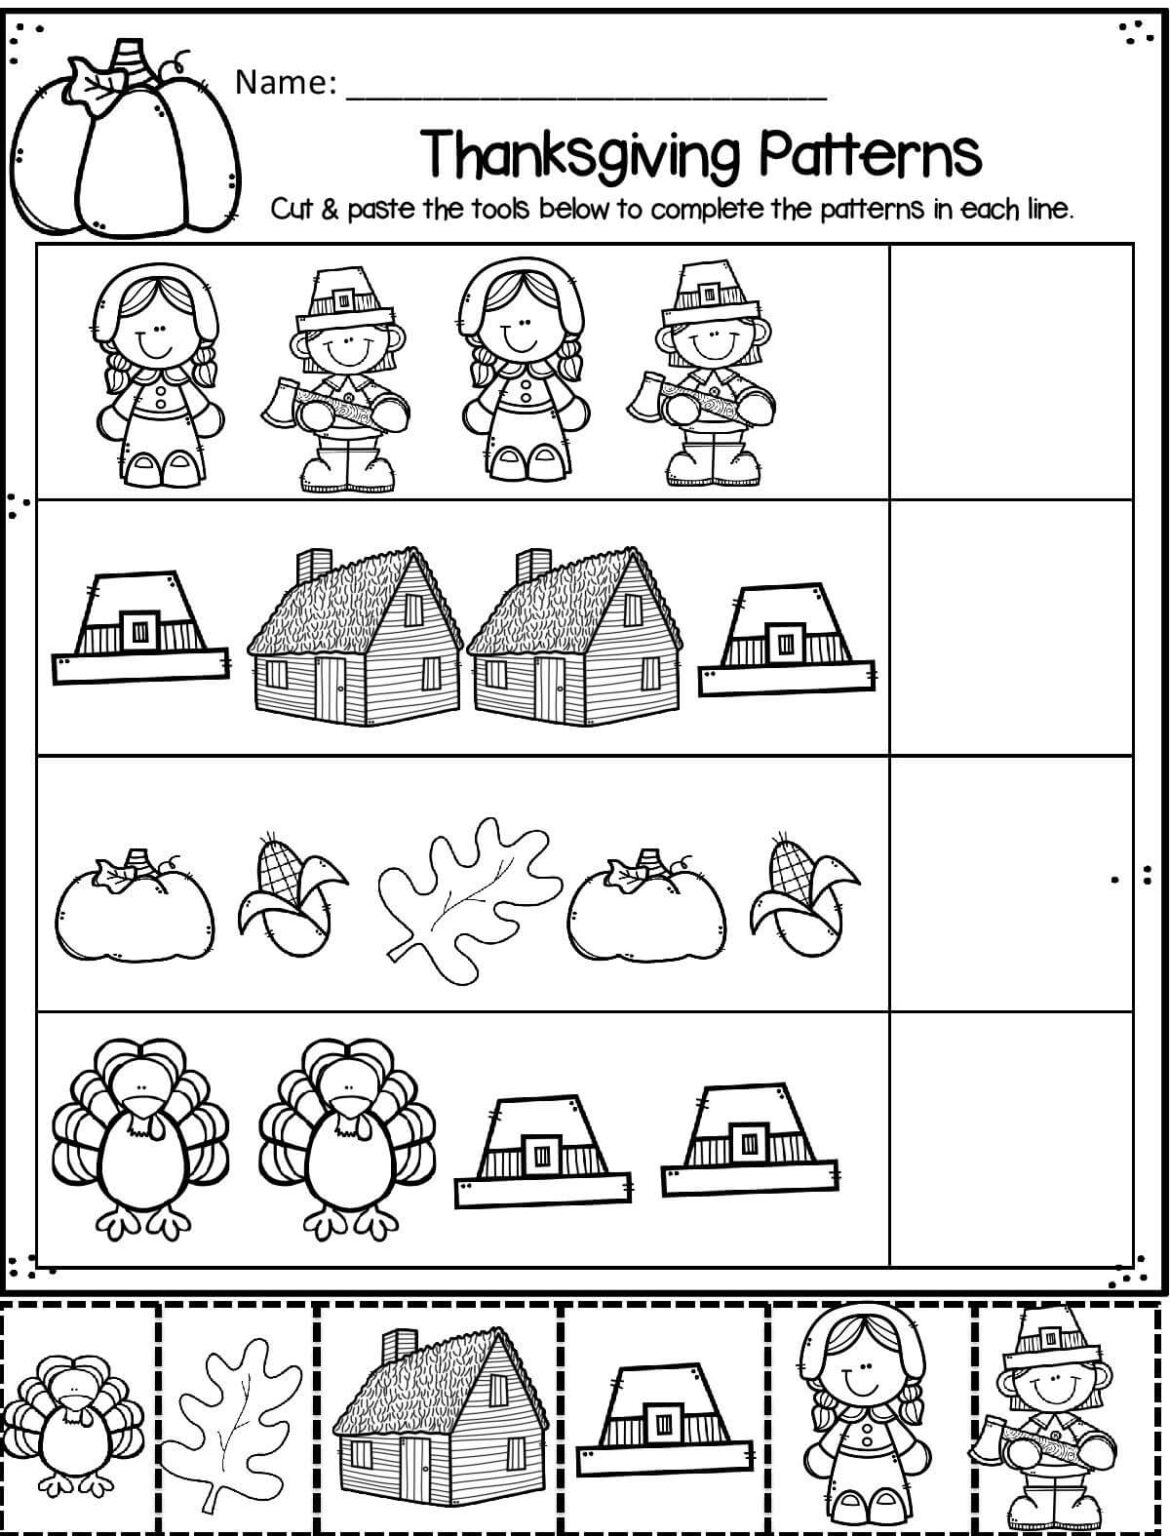 cut-and-paste-thanksgiving-worksheets